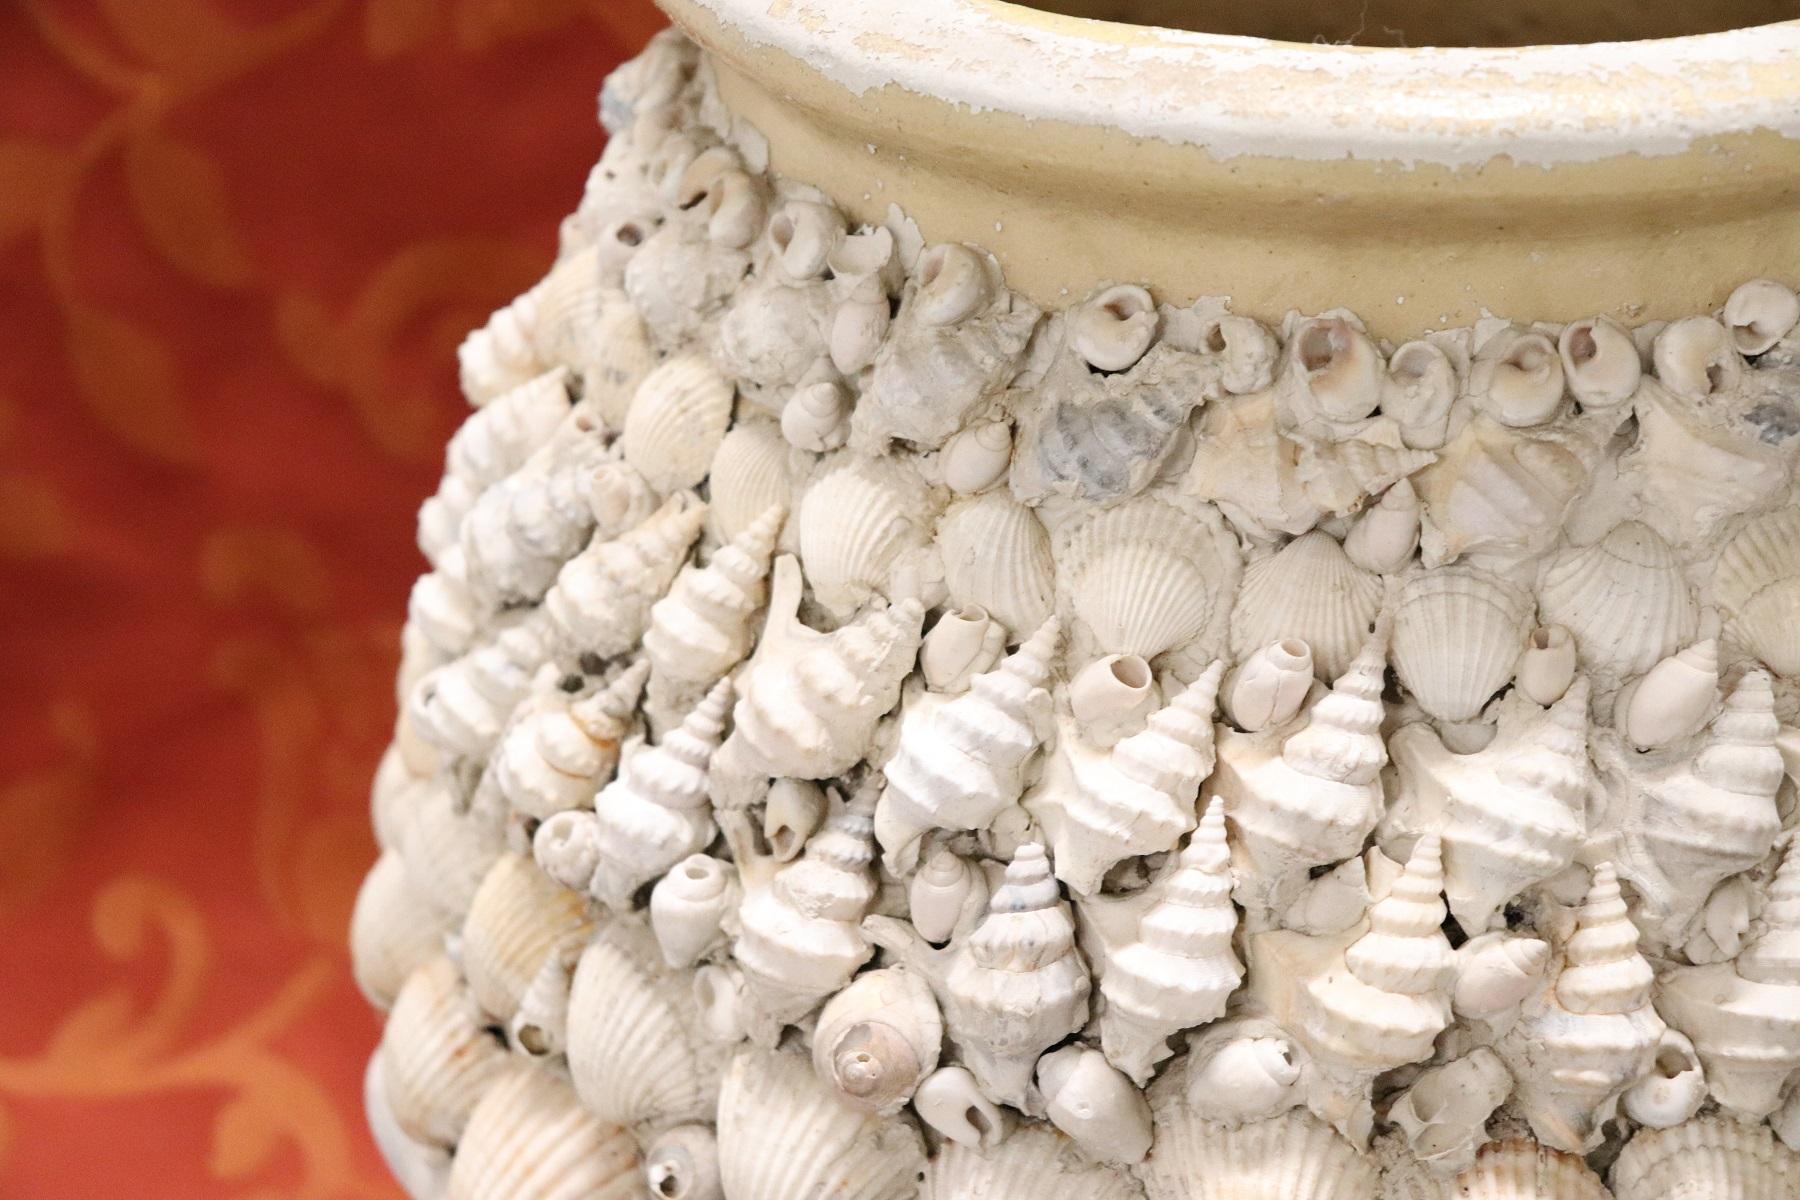 Beautiful artistic ceramic vase completely covered in real shells. Italian craftsmanship. Particular furnishing ideal for your houses by the sea.
Used two small deficiencies visible in photos.